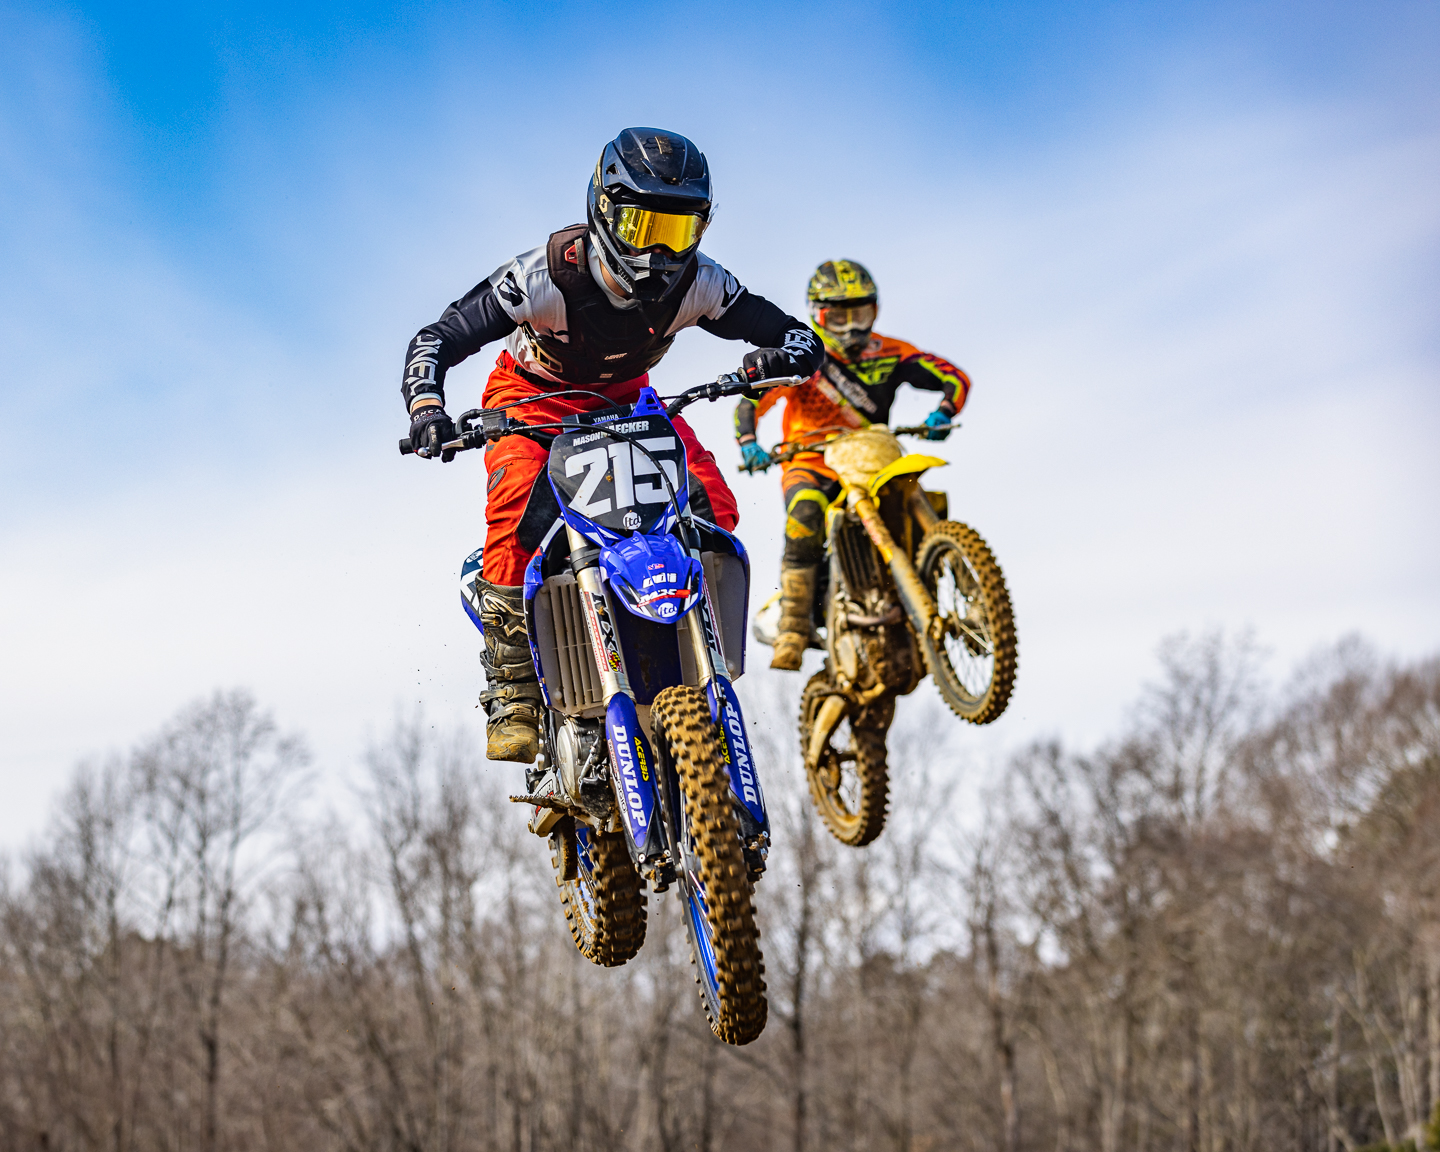 2nd PrizeOpen Color In Class 3 By Eric Wilcox For Flying Dirt Bikes FEB-2022.jpg